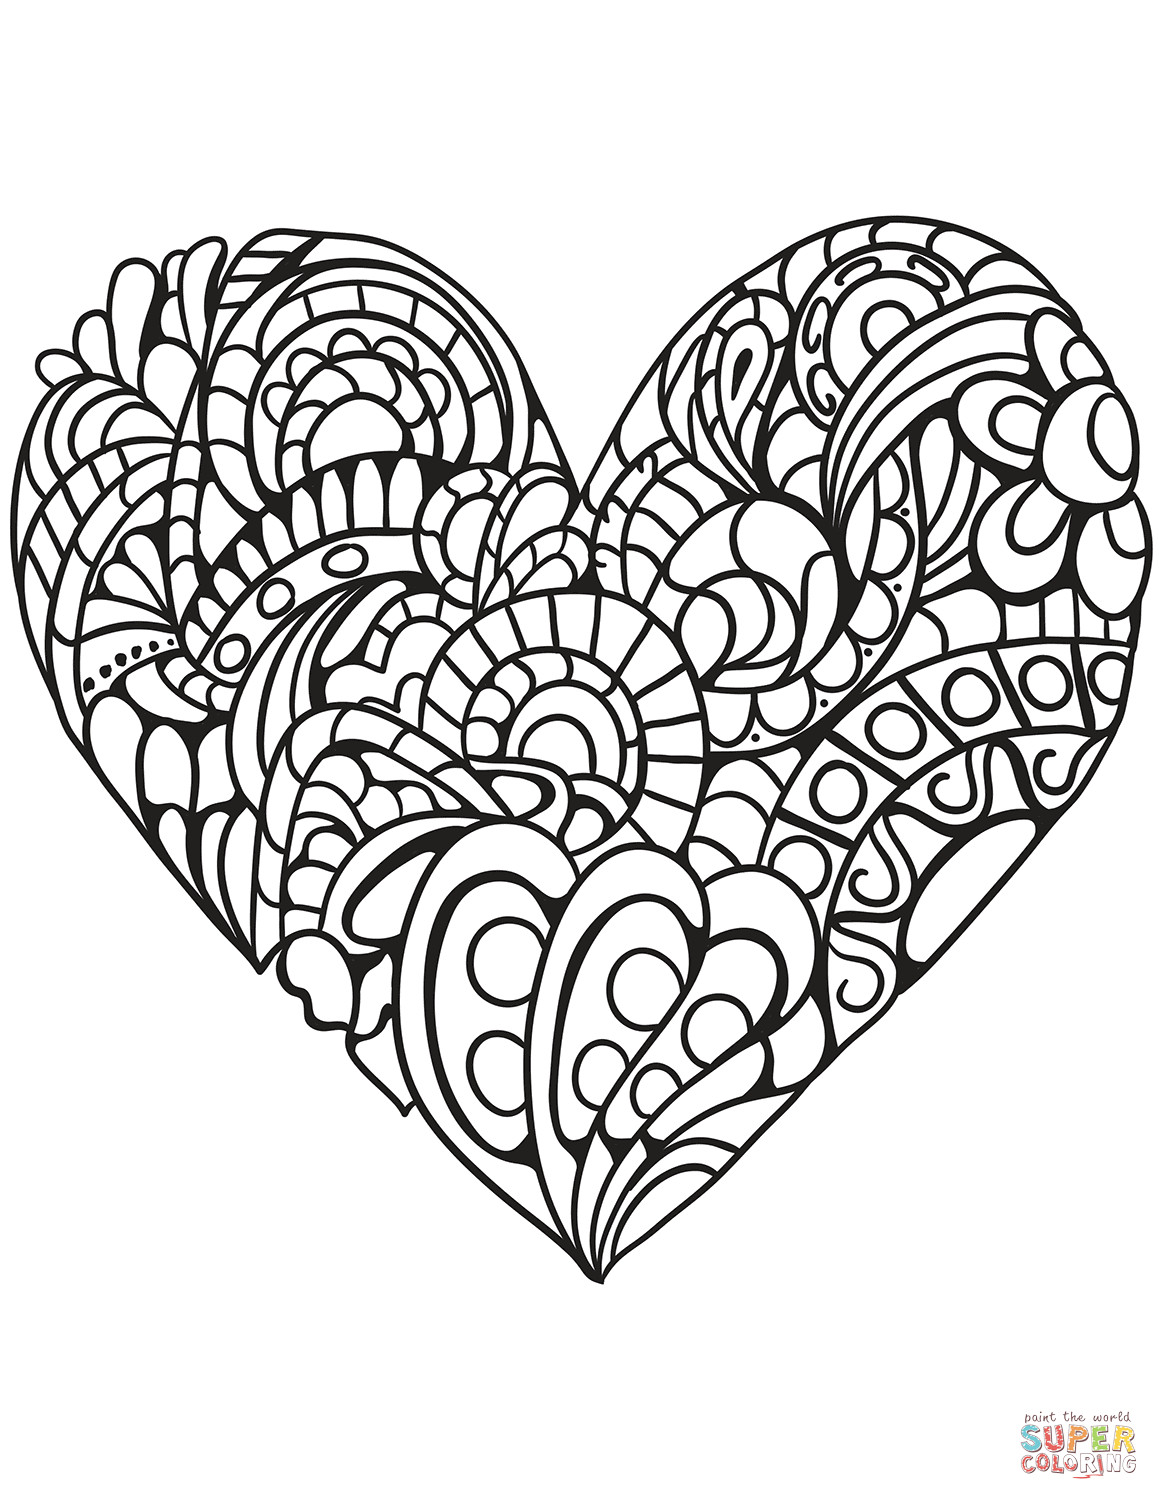 Heart Coloring Pages For Adults
 Zentangle Heart coloring page